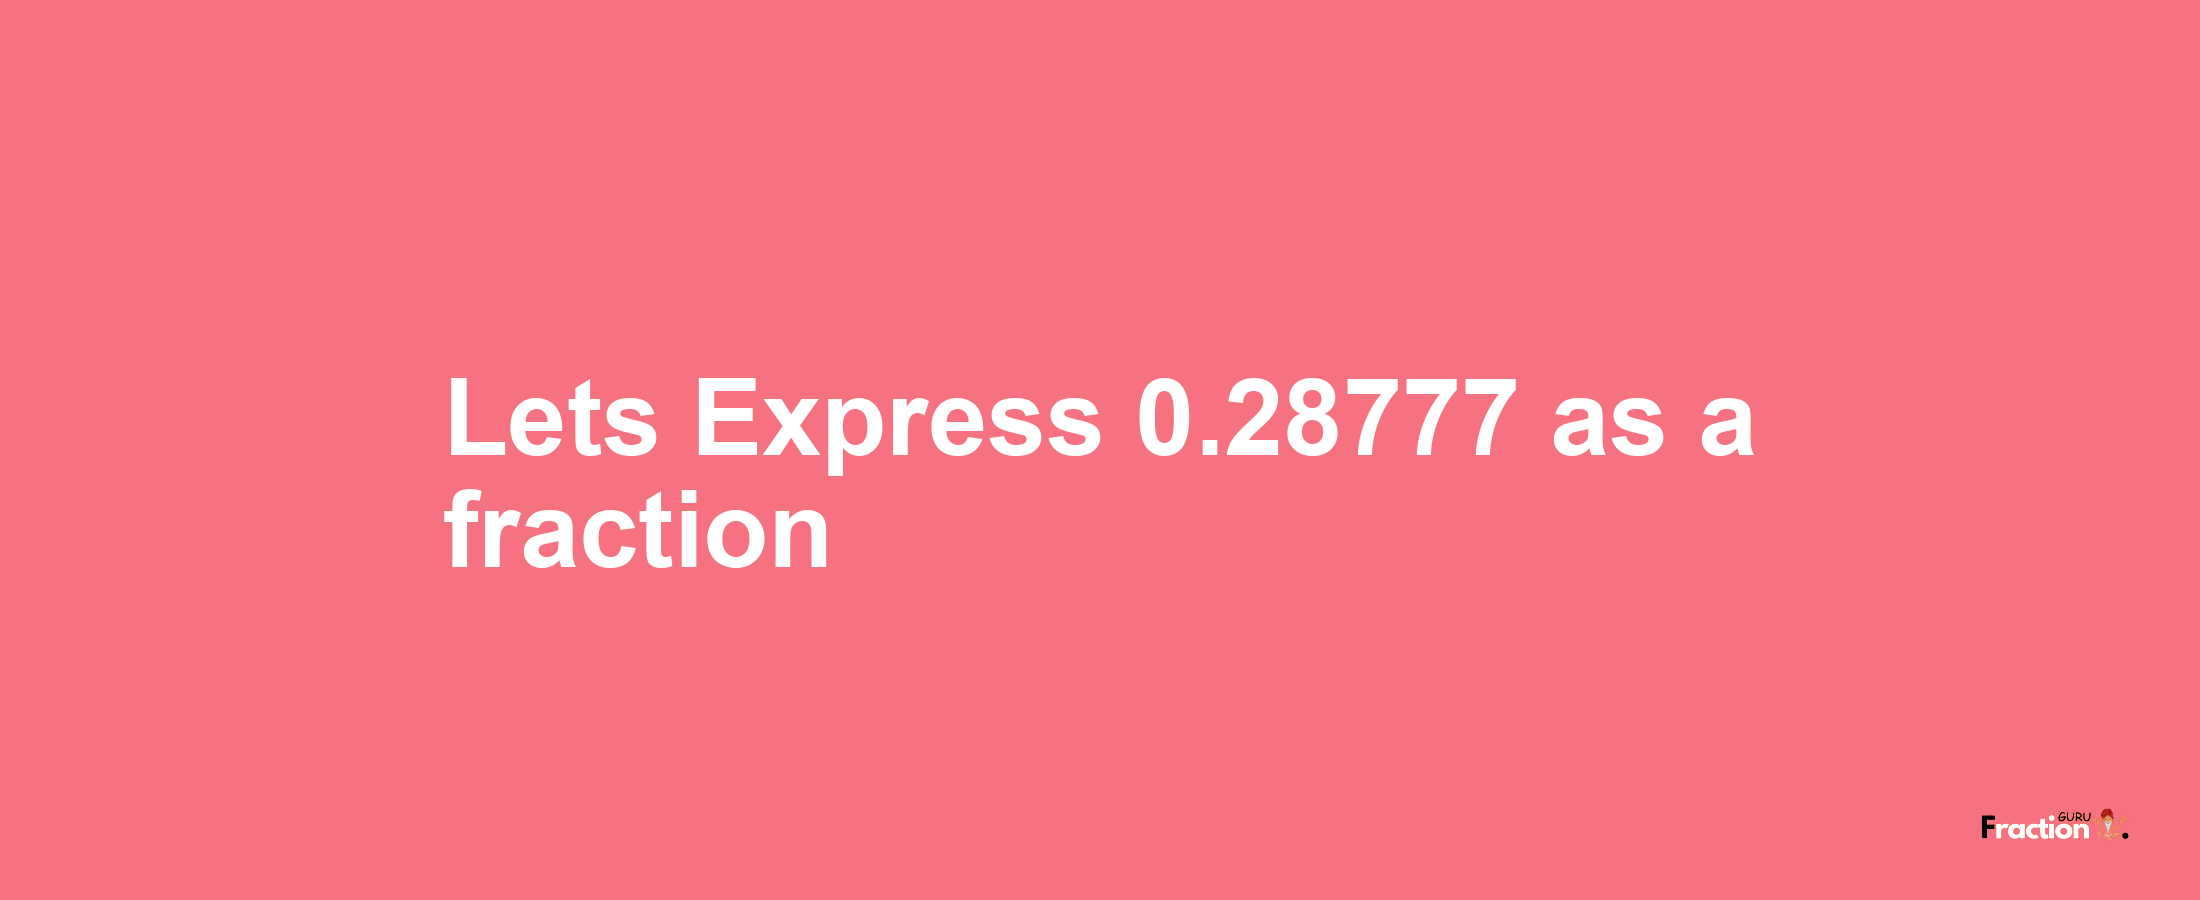 Lets Express 0.28777 as afraction